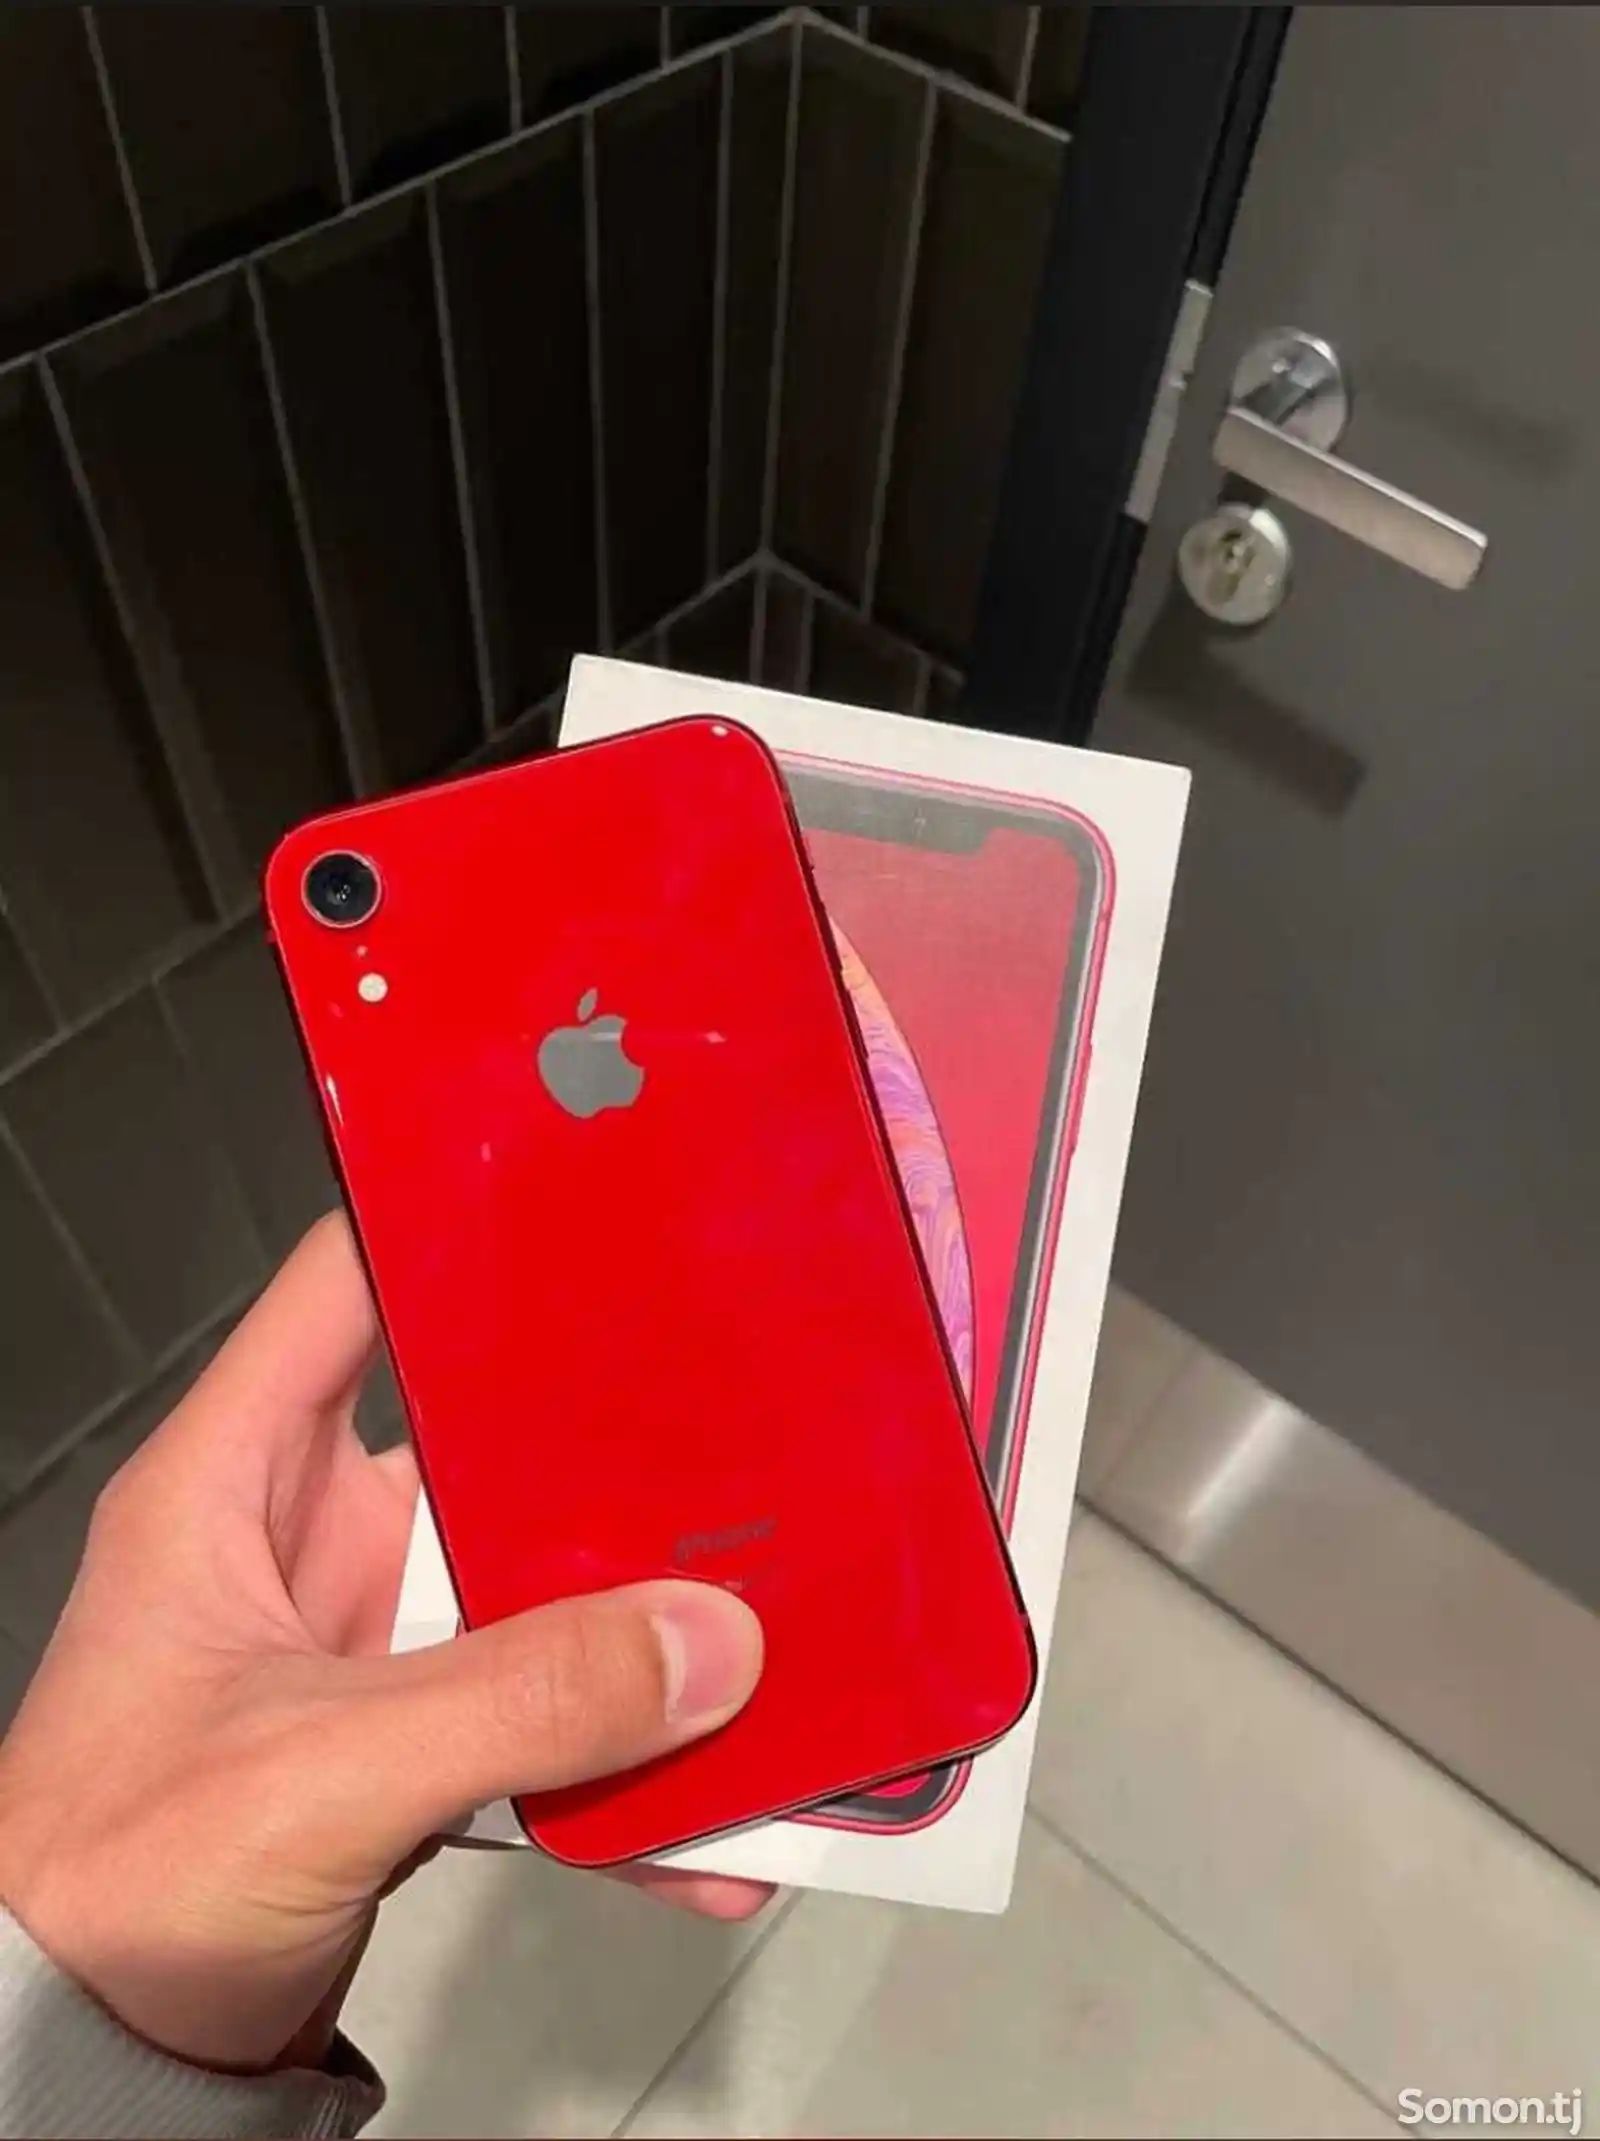 Apple iPhone Xr, 64 gb, Product Red